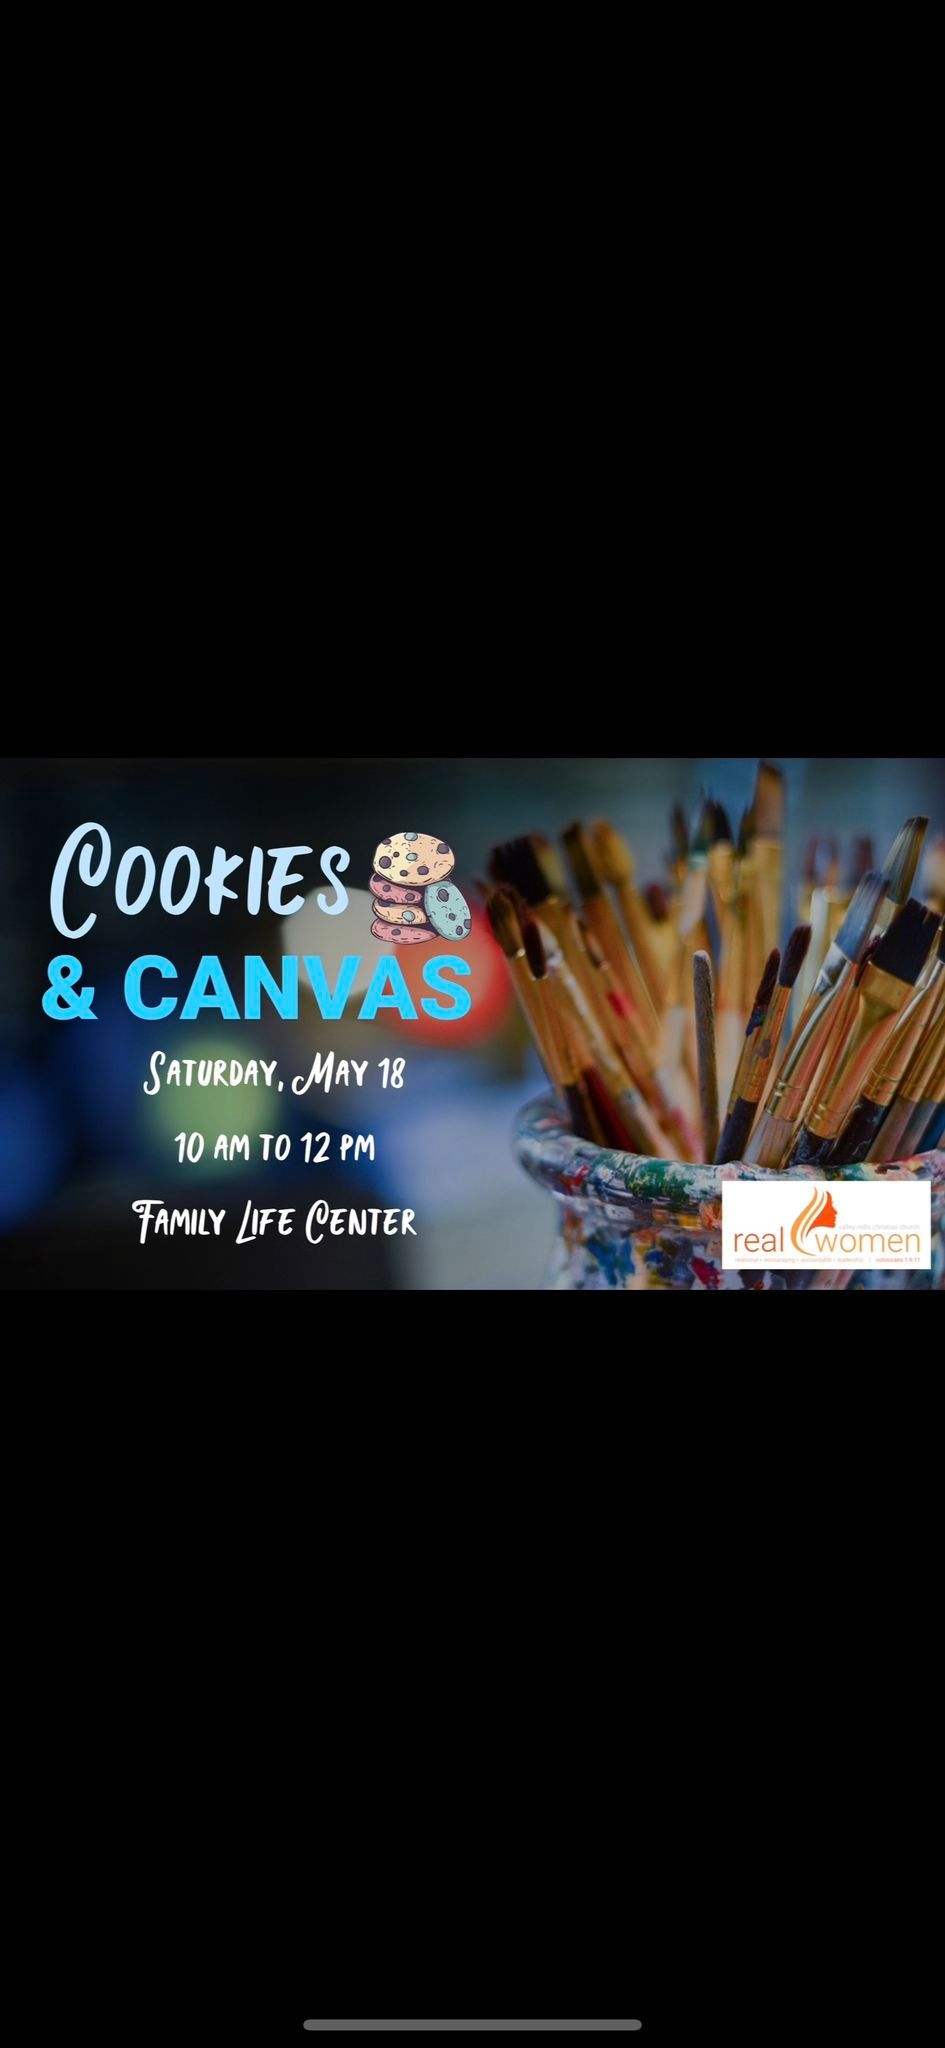 REAL Women\u2019s Ministry: Cookies and Canvas